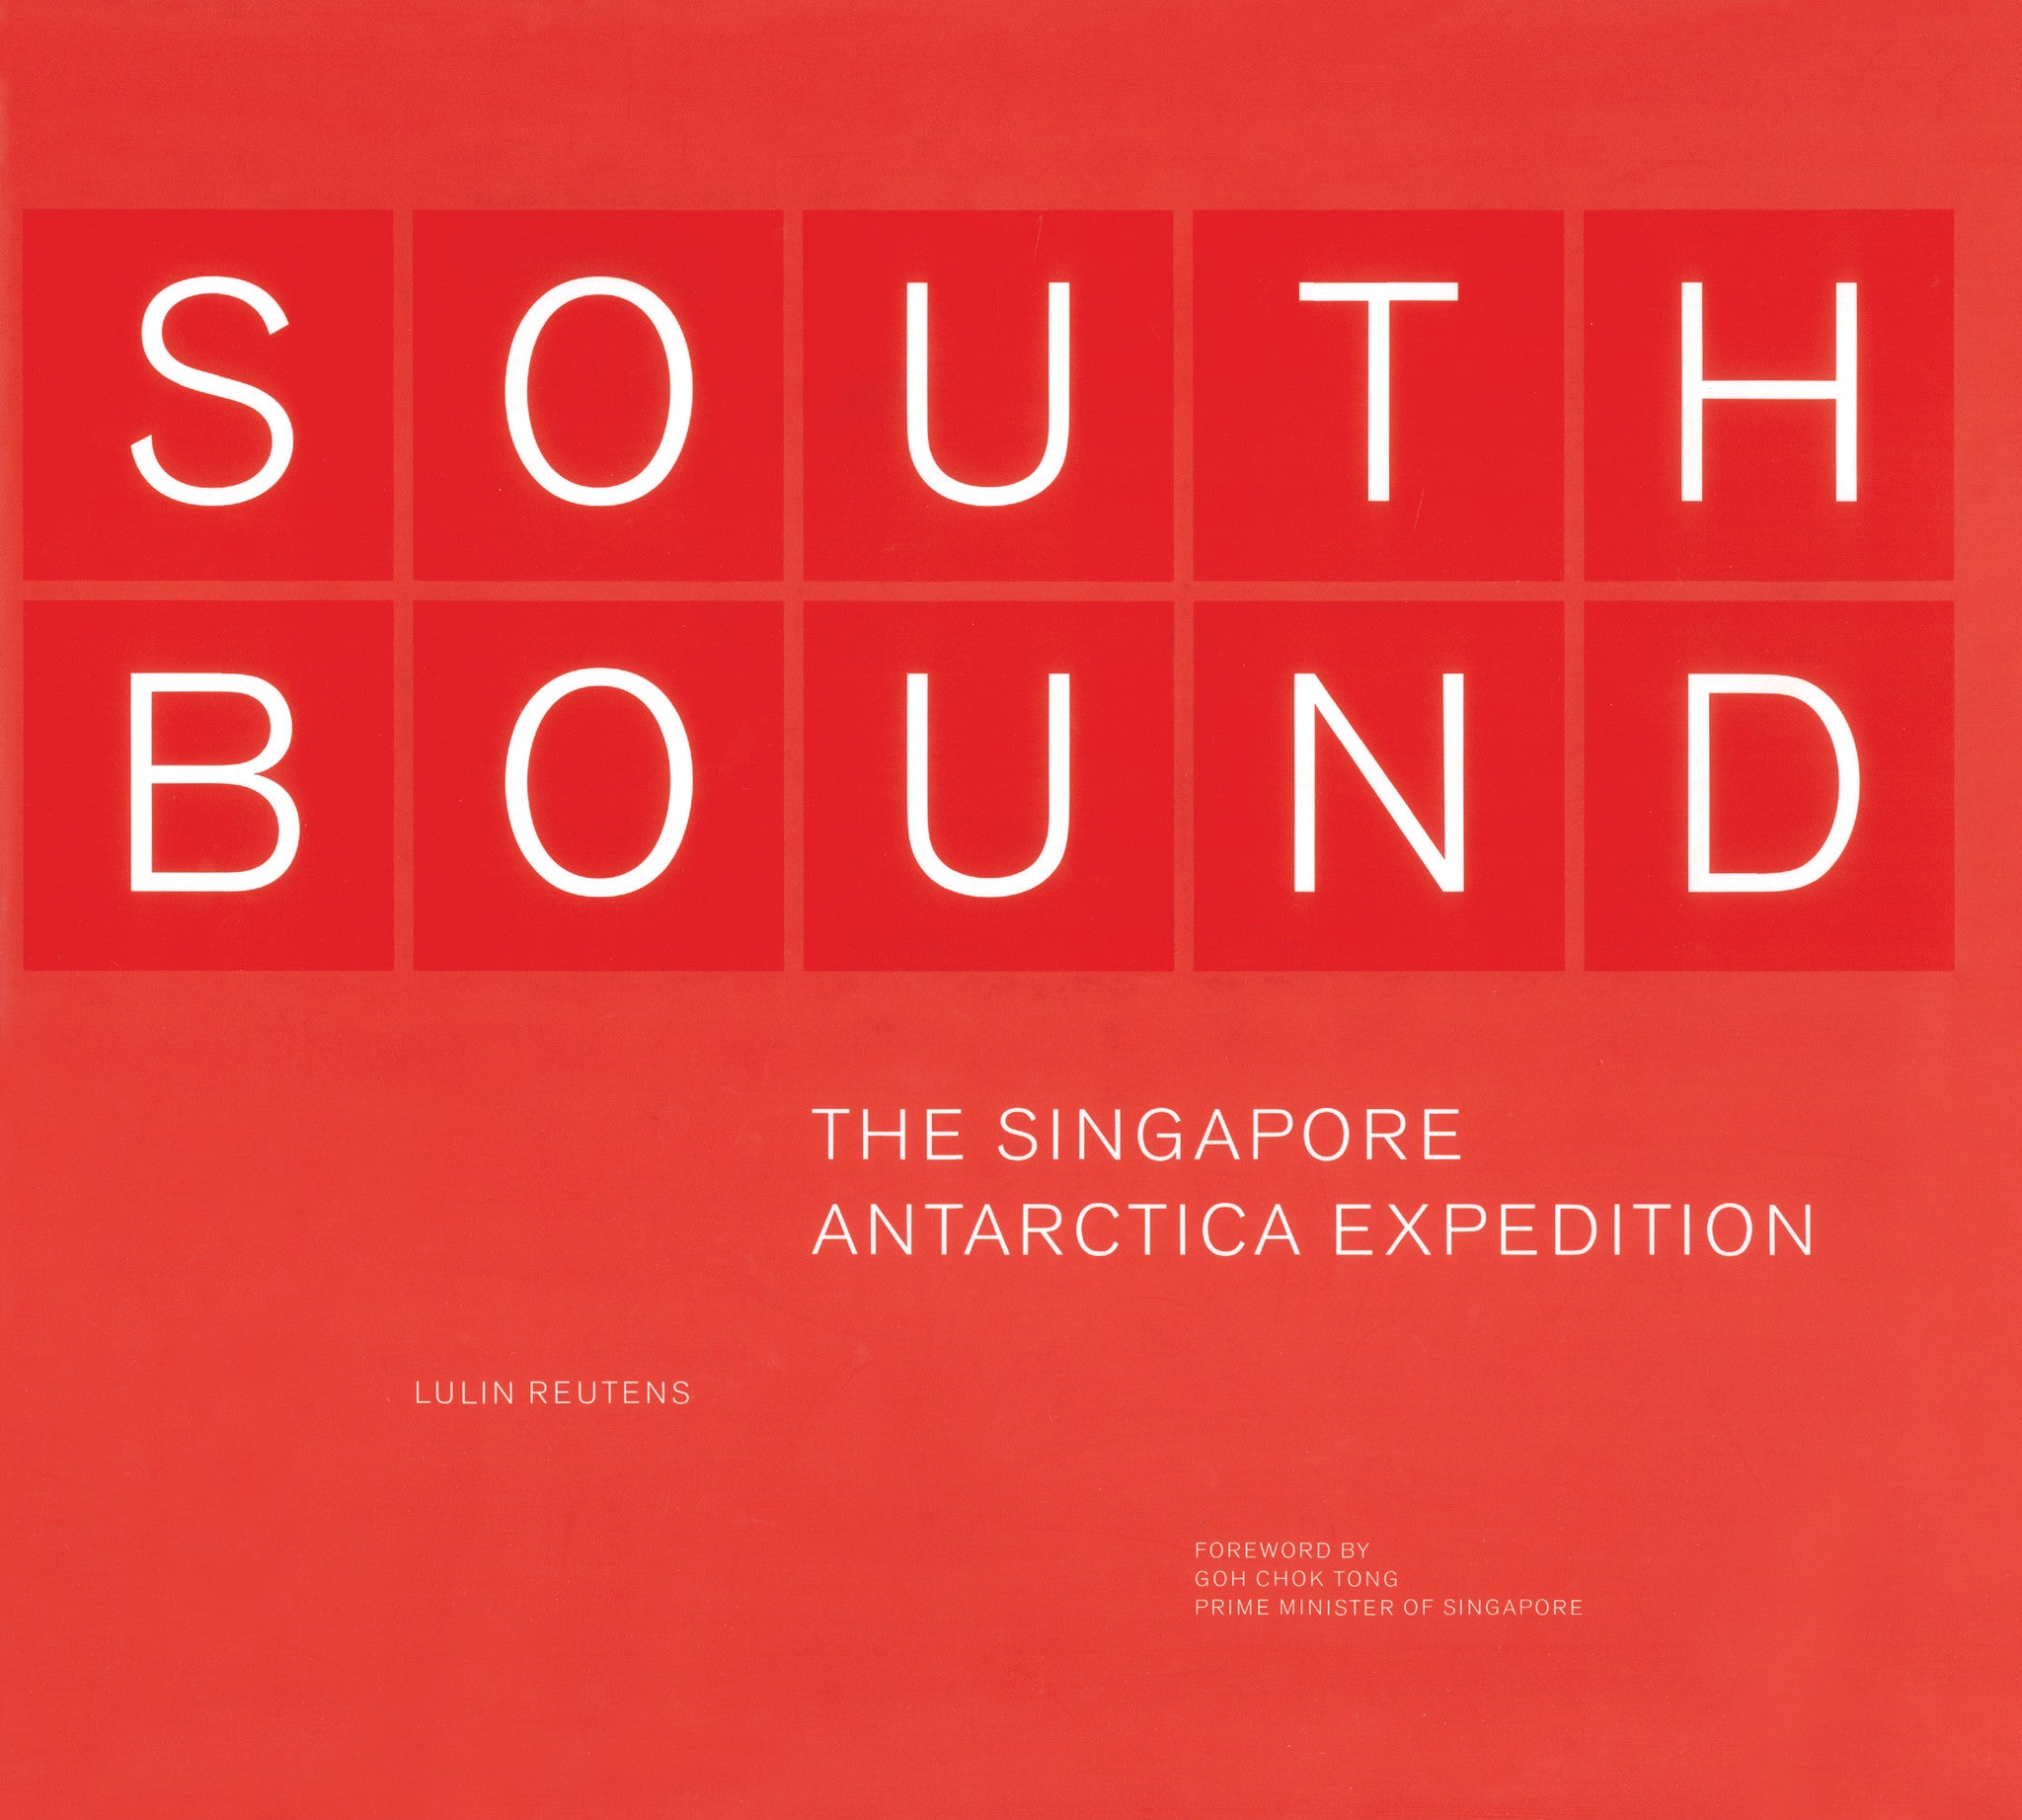 Southbound: The Singapore Antarctica Expedition